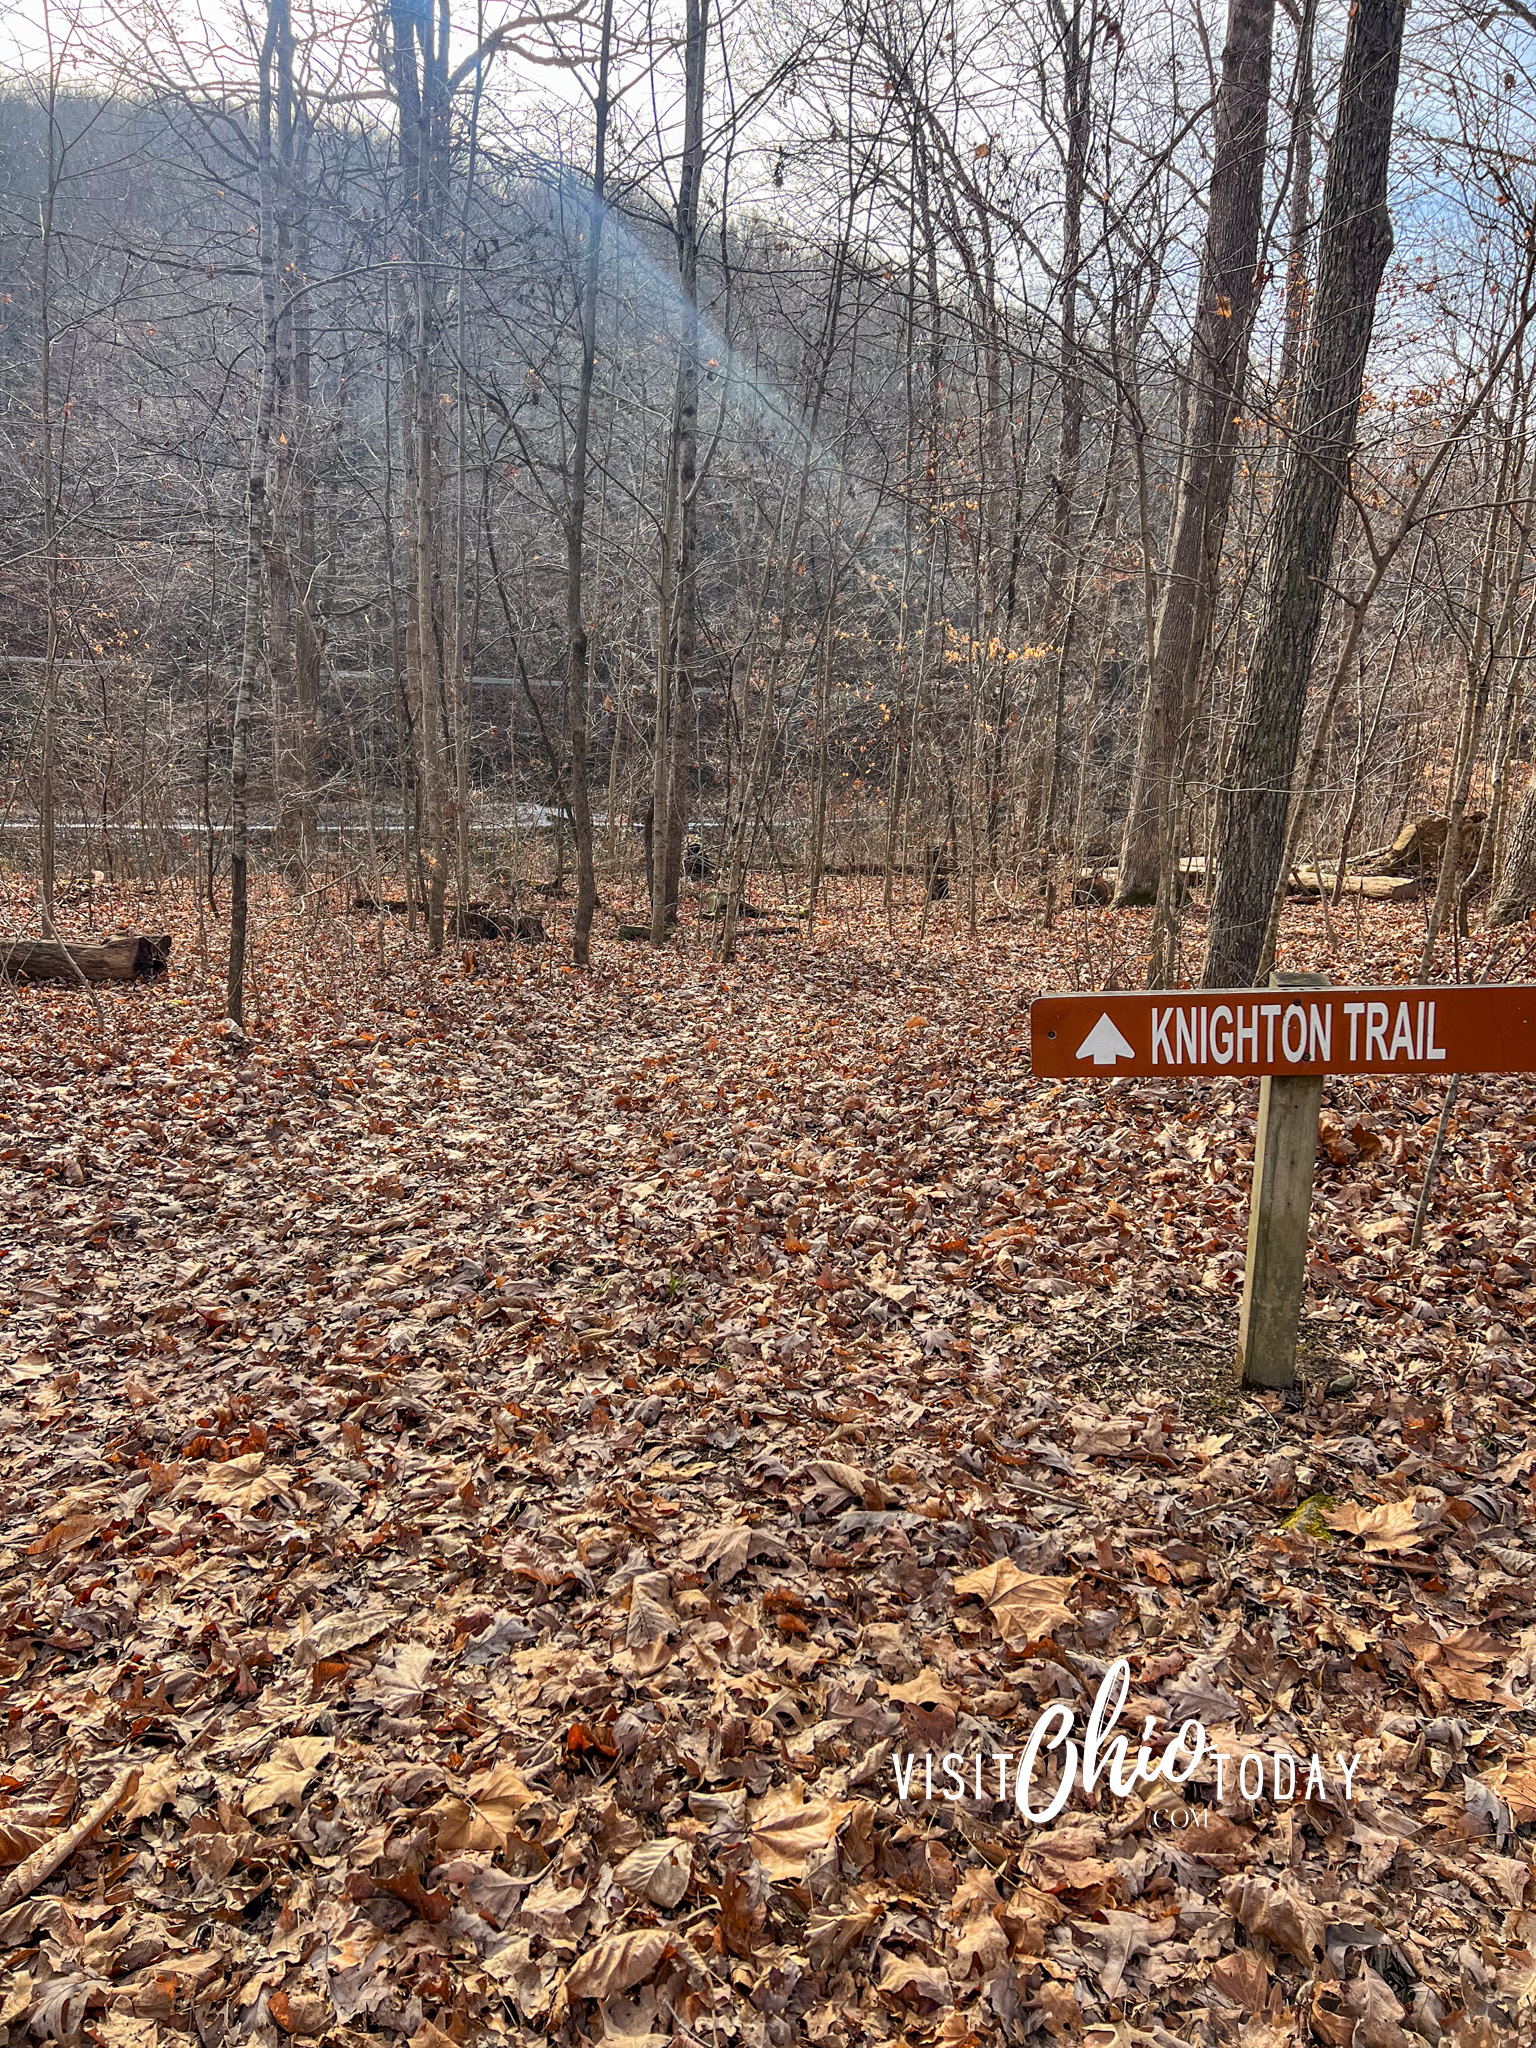 vertical photo of the Shawnee State Park with a Knighton Trail sign and the ground covered in leaves with bare trees around. Photo credit: Cindy Gordon of VisitOhioToday.com